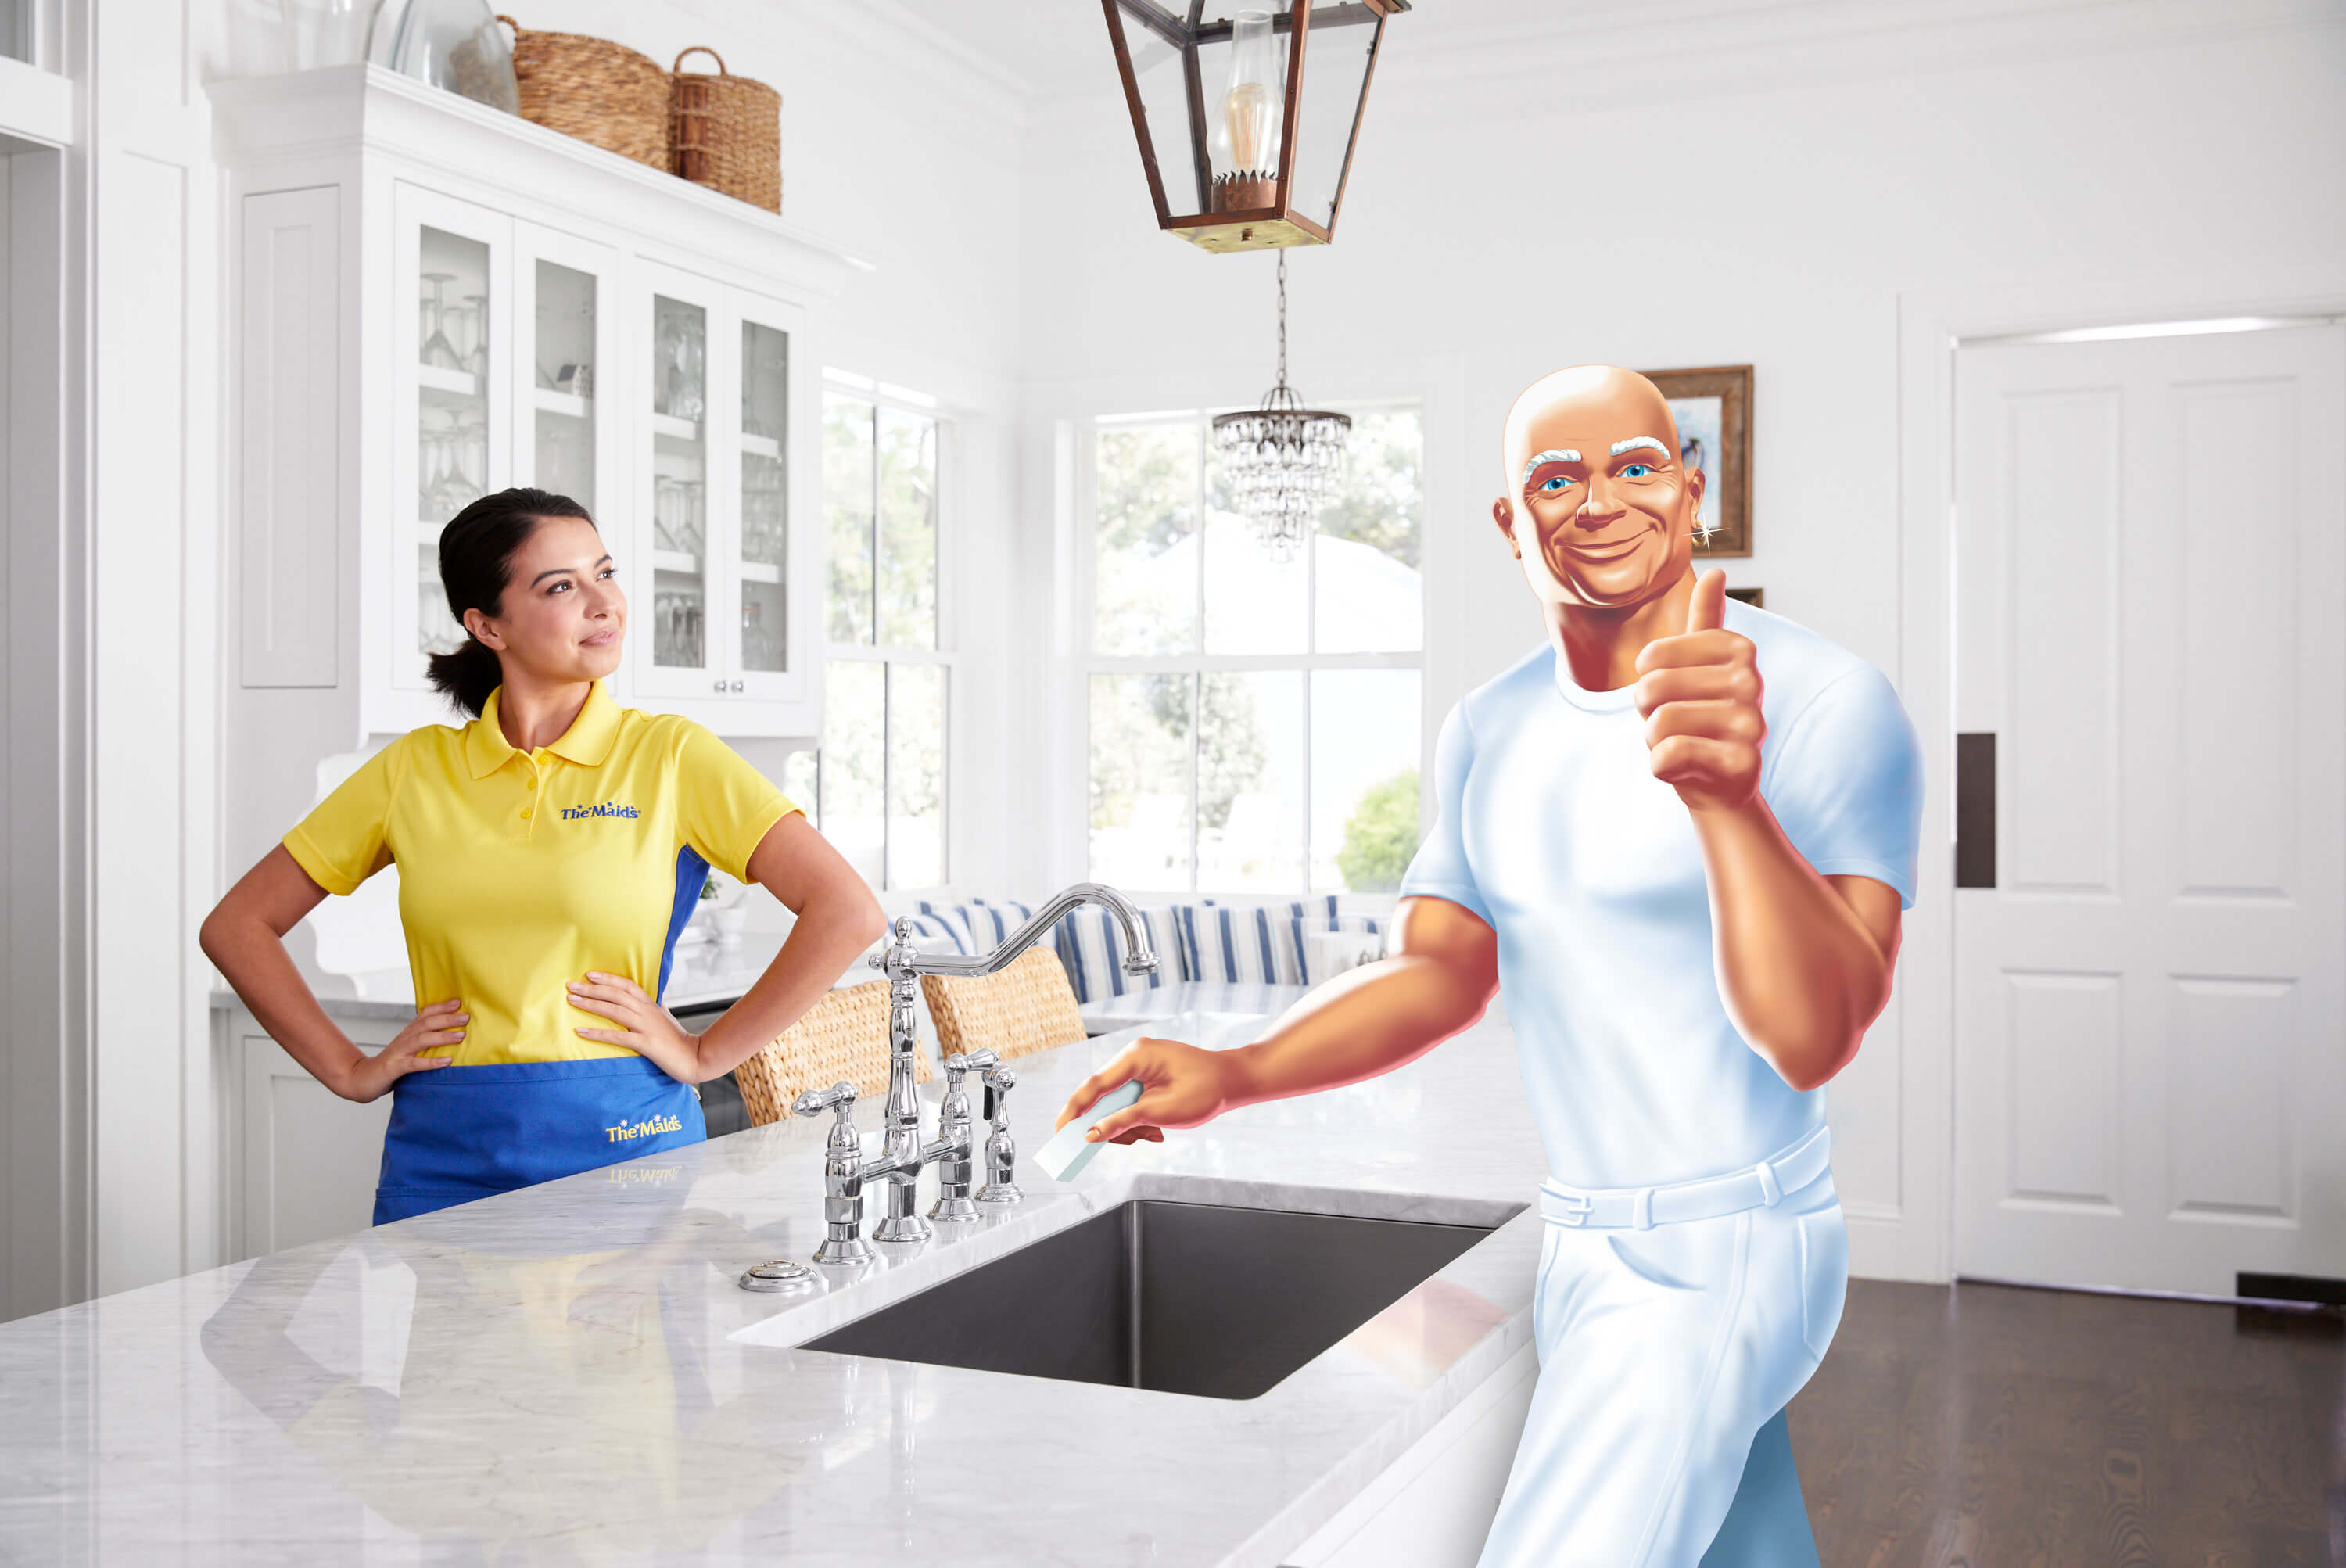 The Maids Mr Clean Kitchen Counter